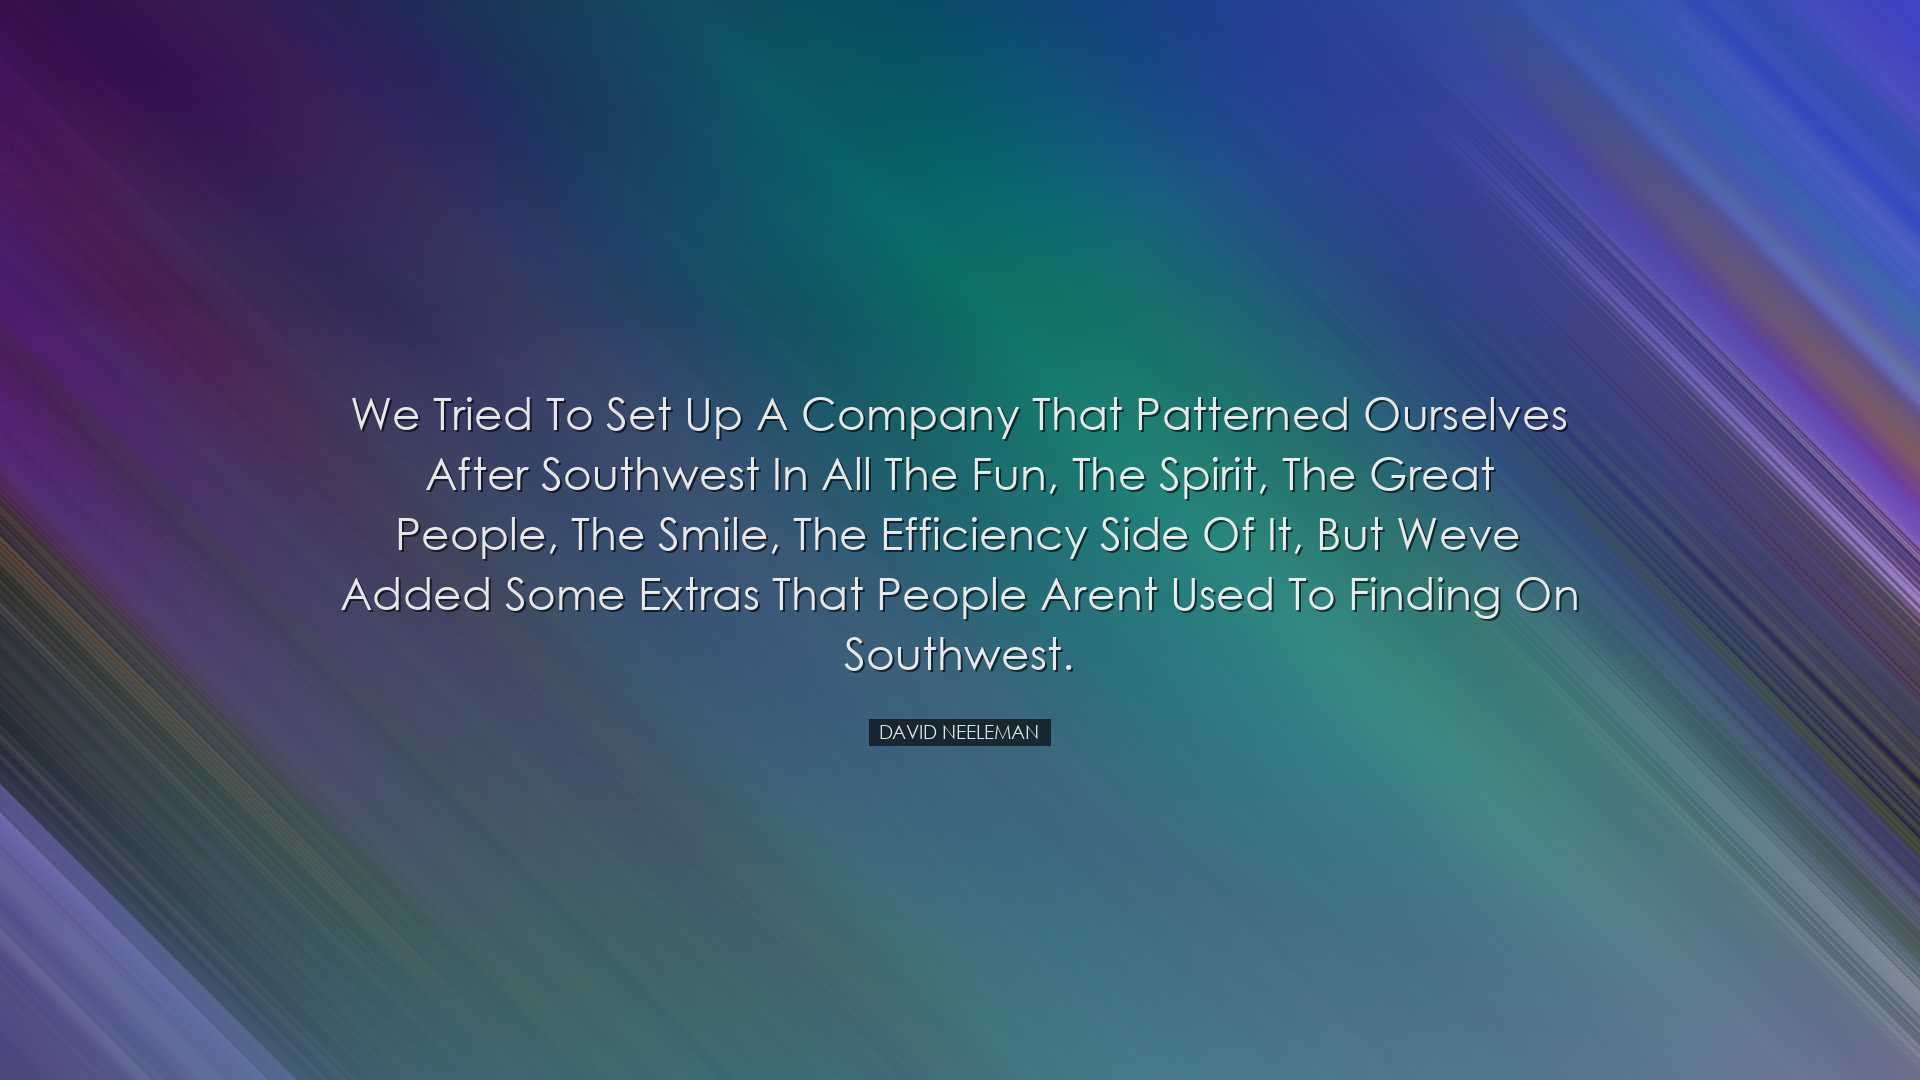 We tried to set up a company that patterned ourselves after Southw